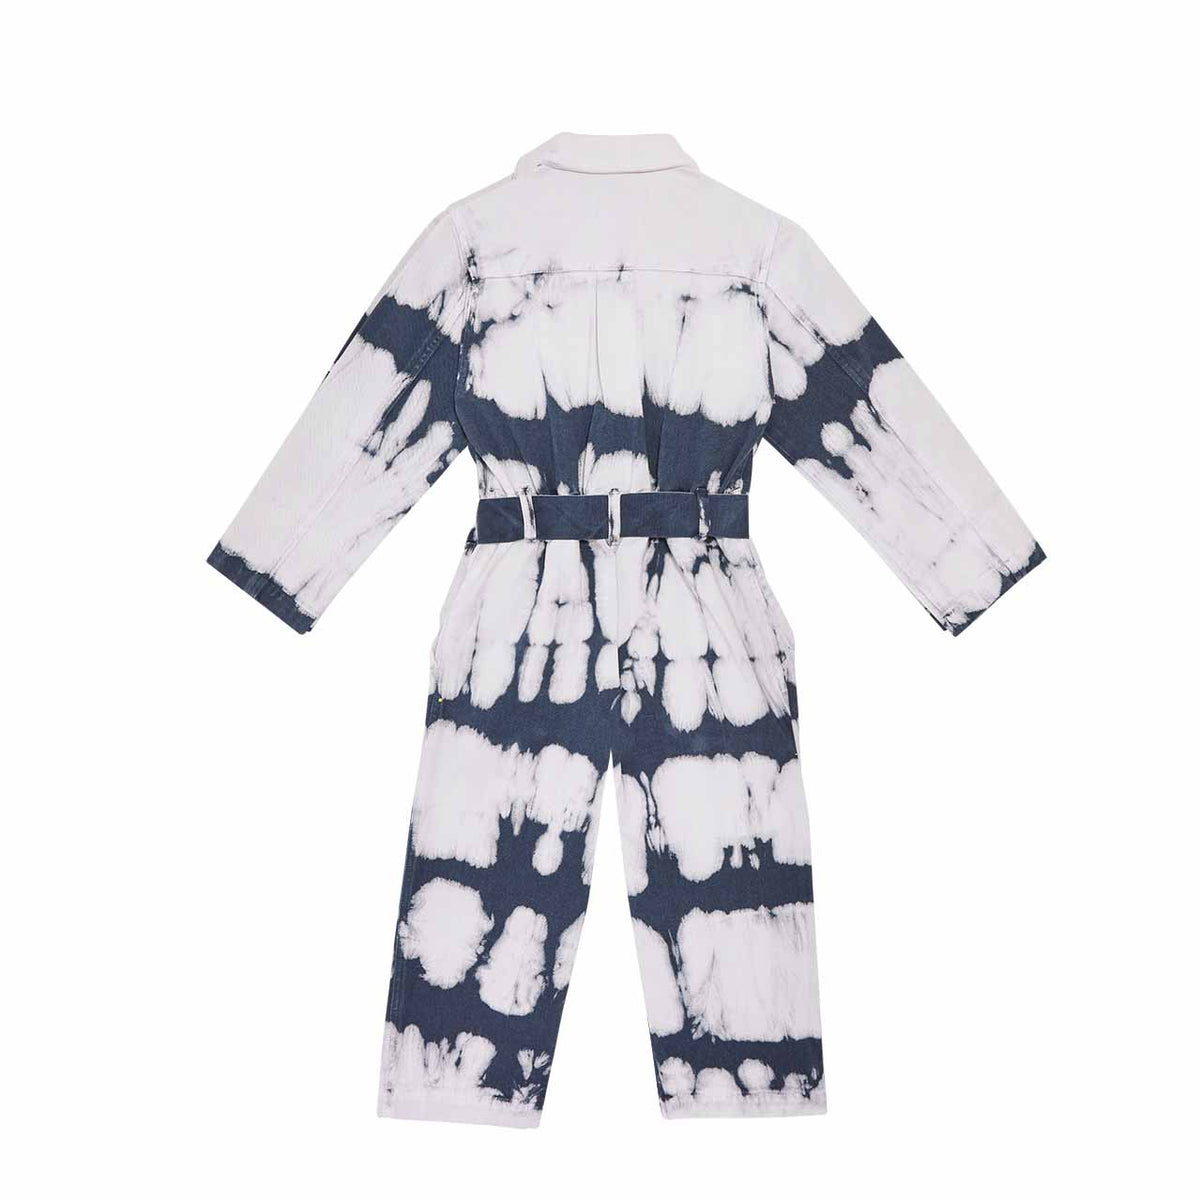 VINCENT-OVERALL-TIE-DYE-NAVY-BACK